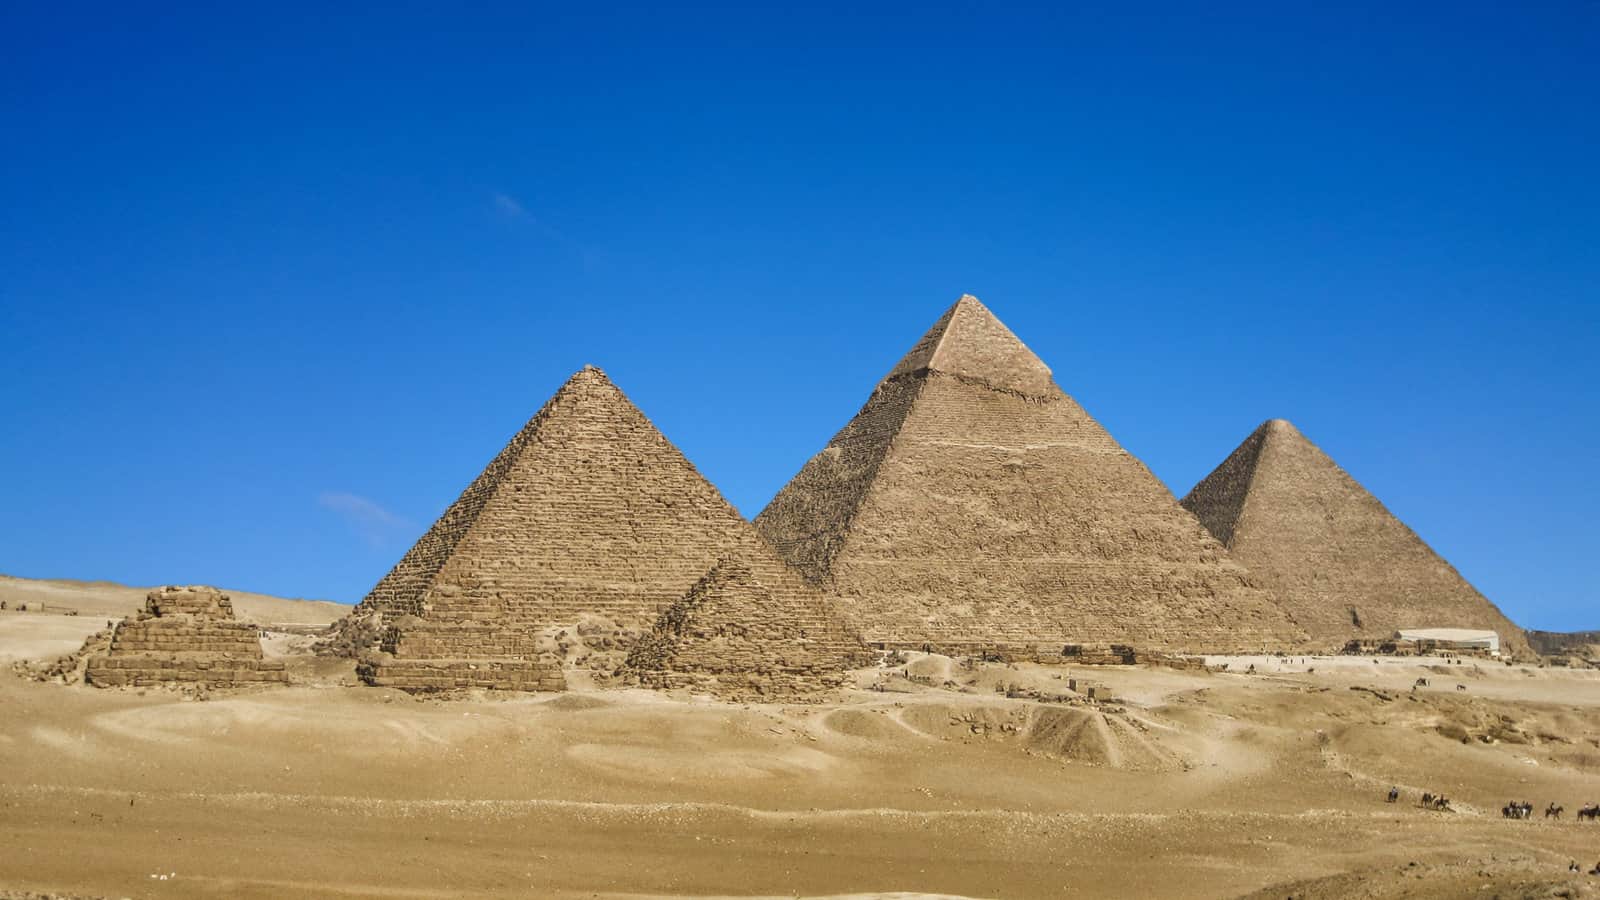 Image of the Pyramids of Giza, an example of the Egyptian Pyramids